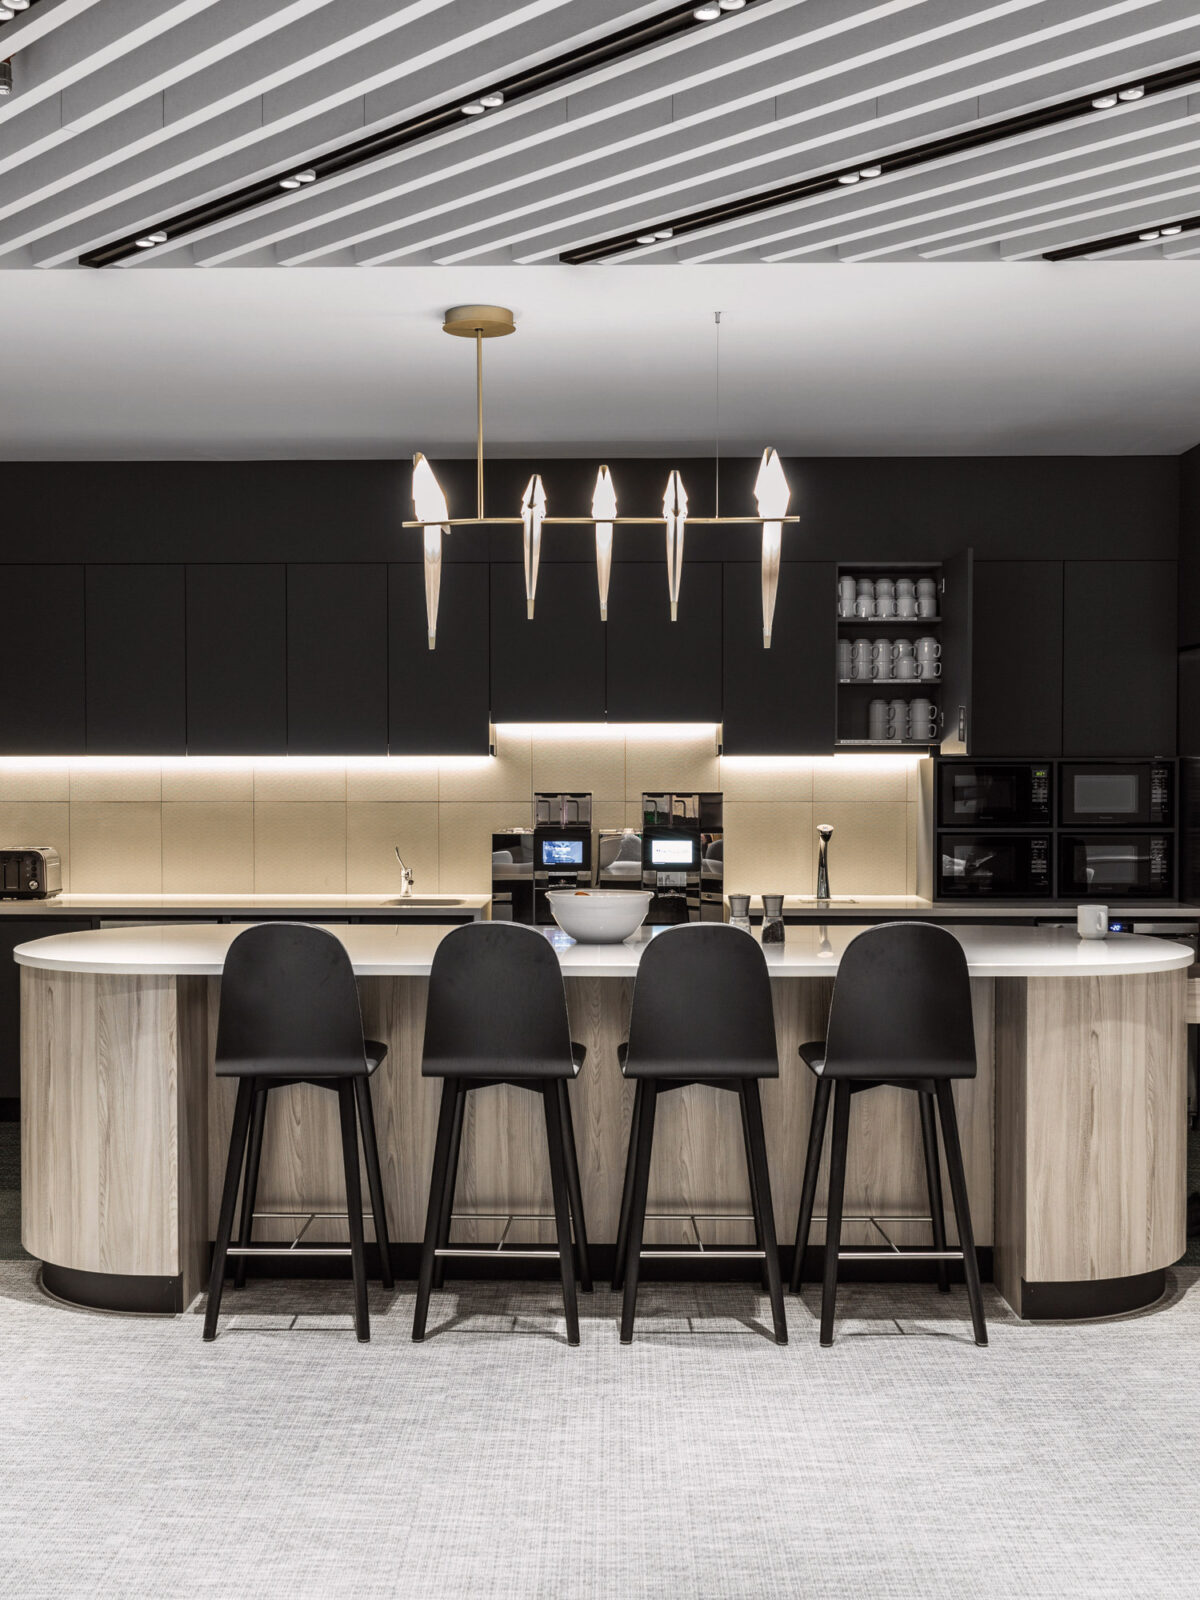 Modern kitchen with curved island, black stools, and pendant lighting. Sleek cabinetry complements the integrated appliances and under-cabinet lighting, showcasing a minimalist aesthetic with a monochrome palette.